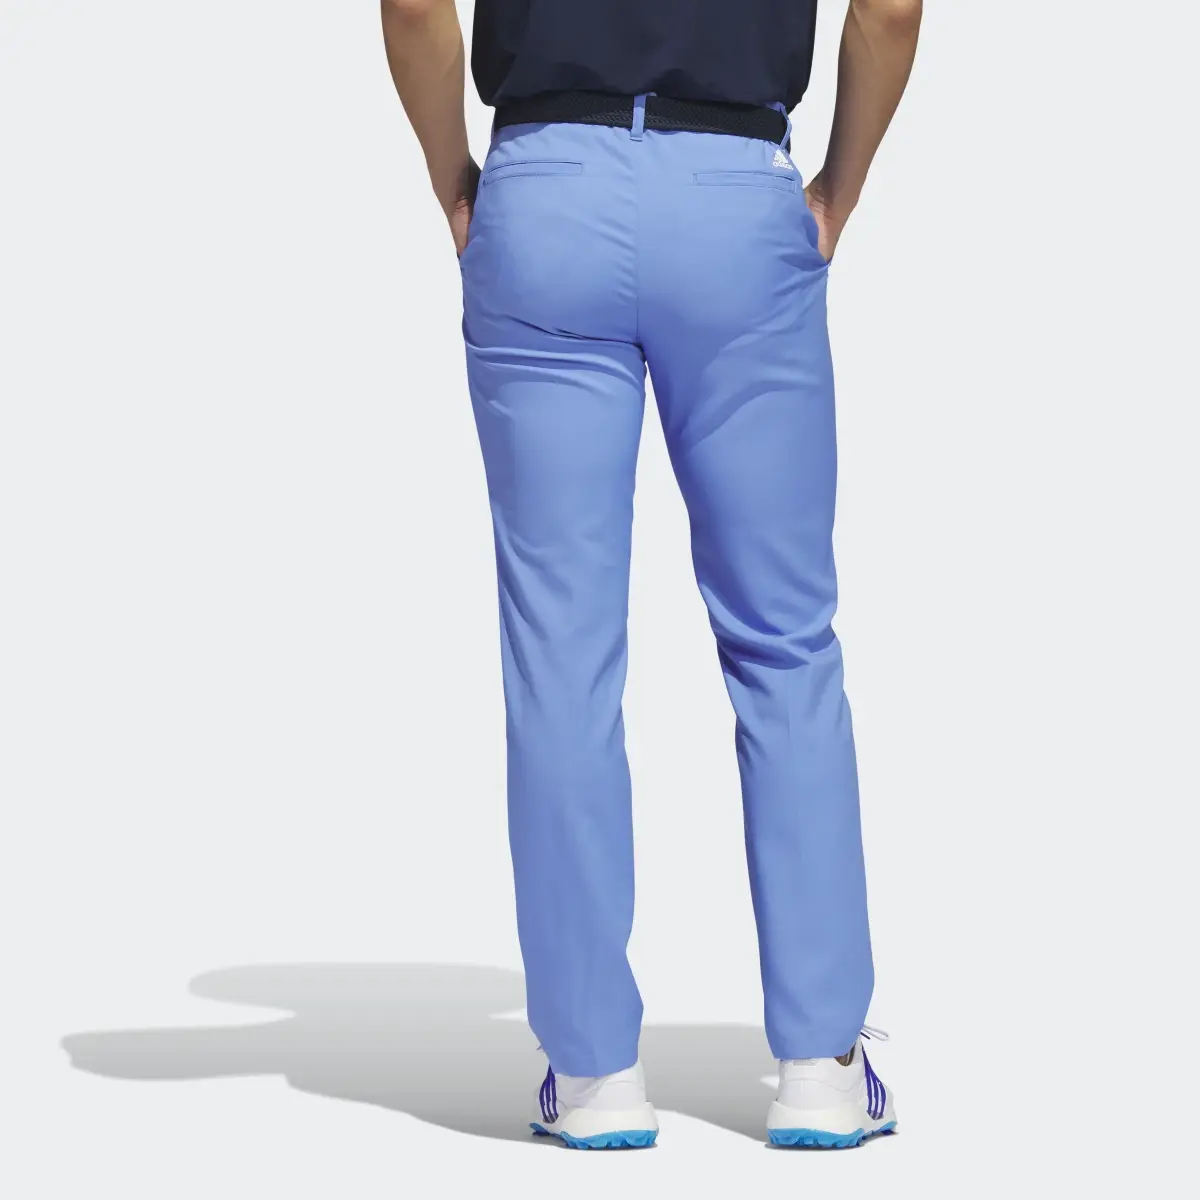 Adidas Ultimate365 Tapered Trousers. 2